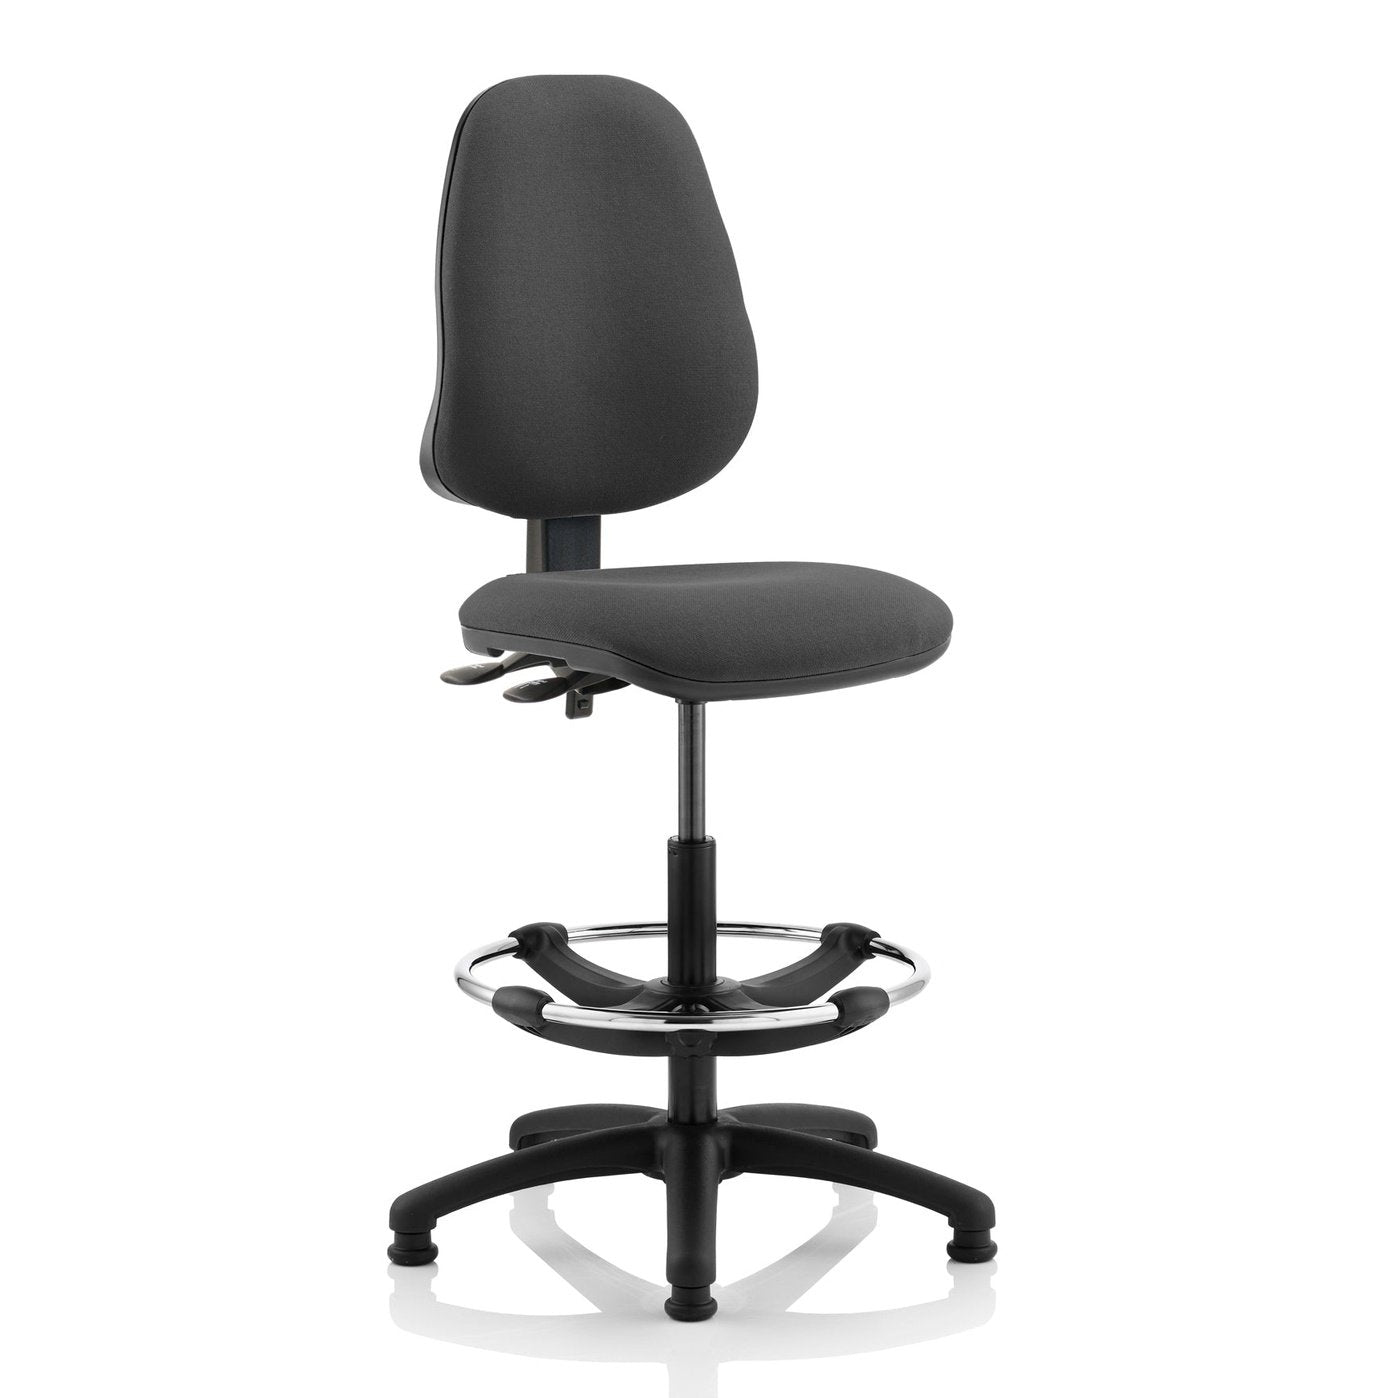 Eclipse Plus II Task Operator Office Chair - Hi-Rise Draughtsman Kit, Fabric Seat & Back, Metal Frame, 125kg Capacity, 8hr Use, Adjustable Arms